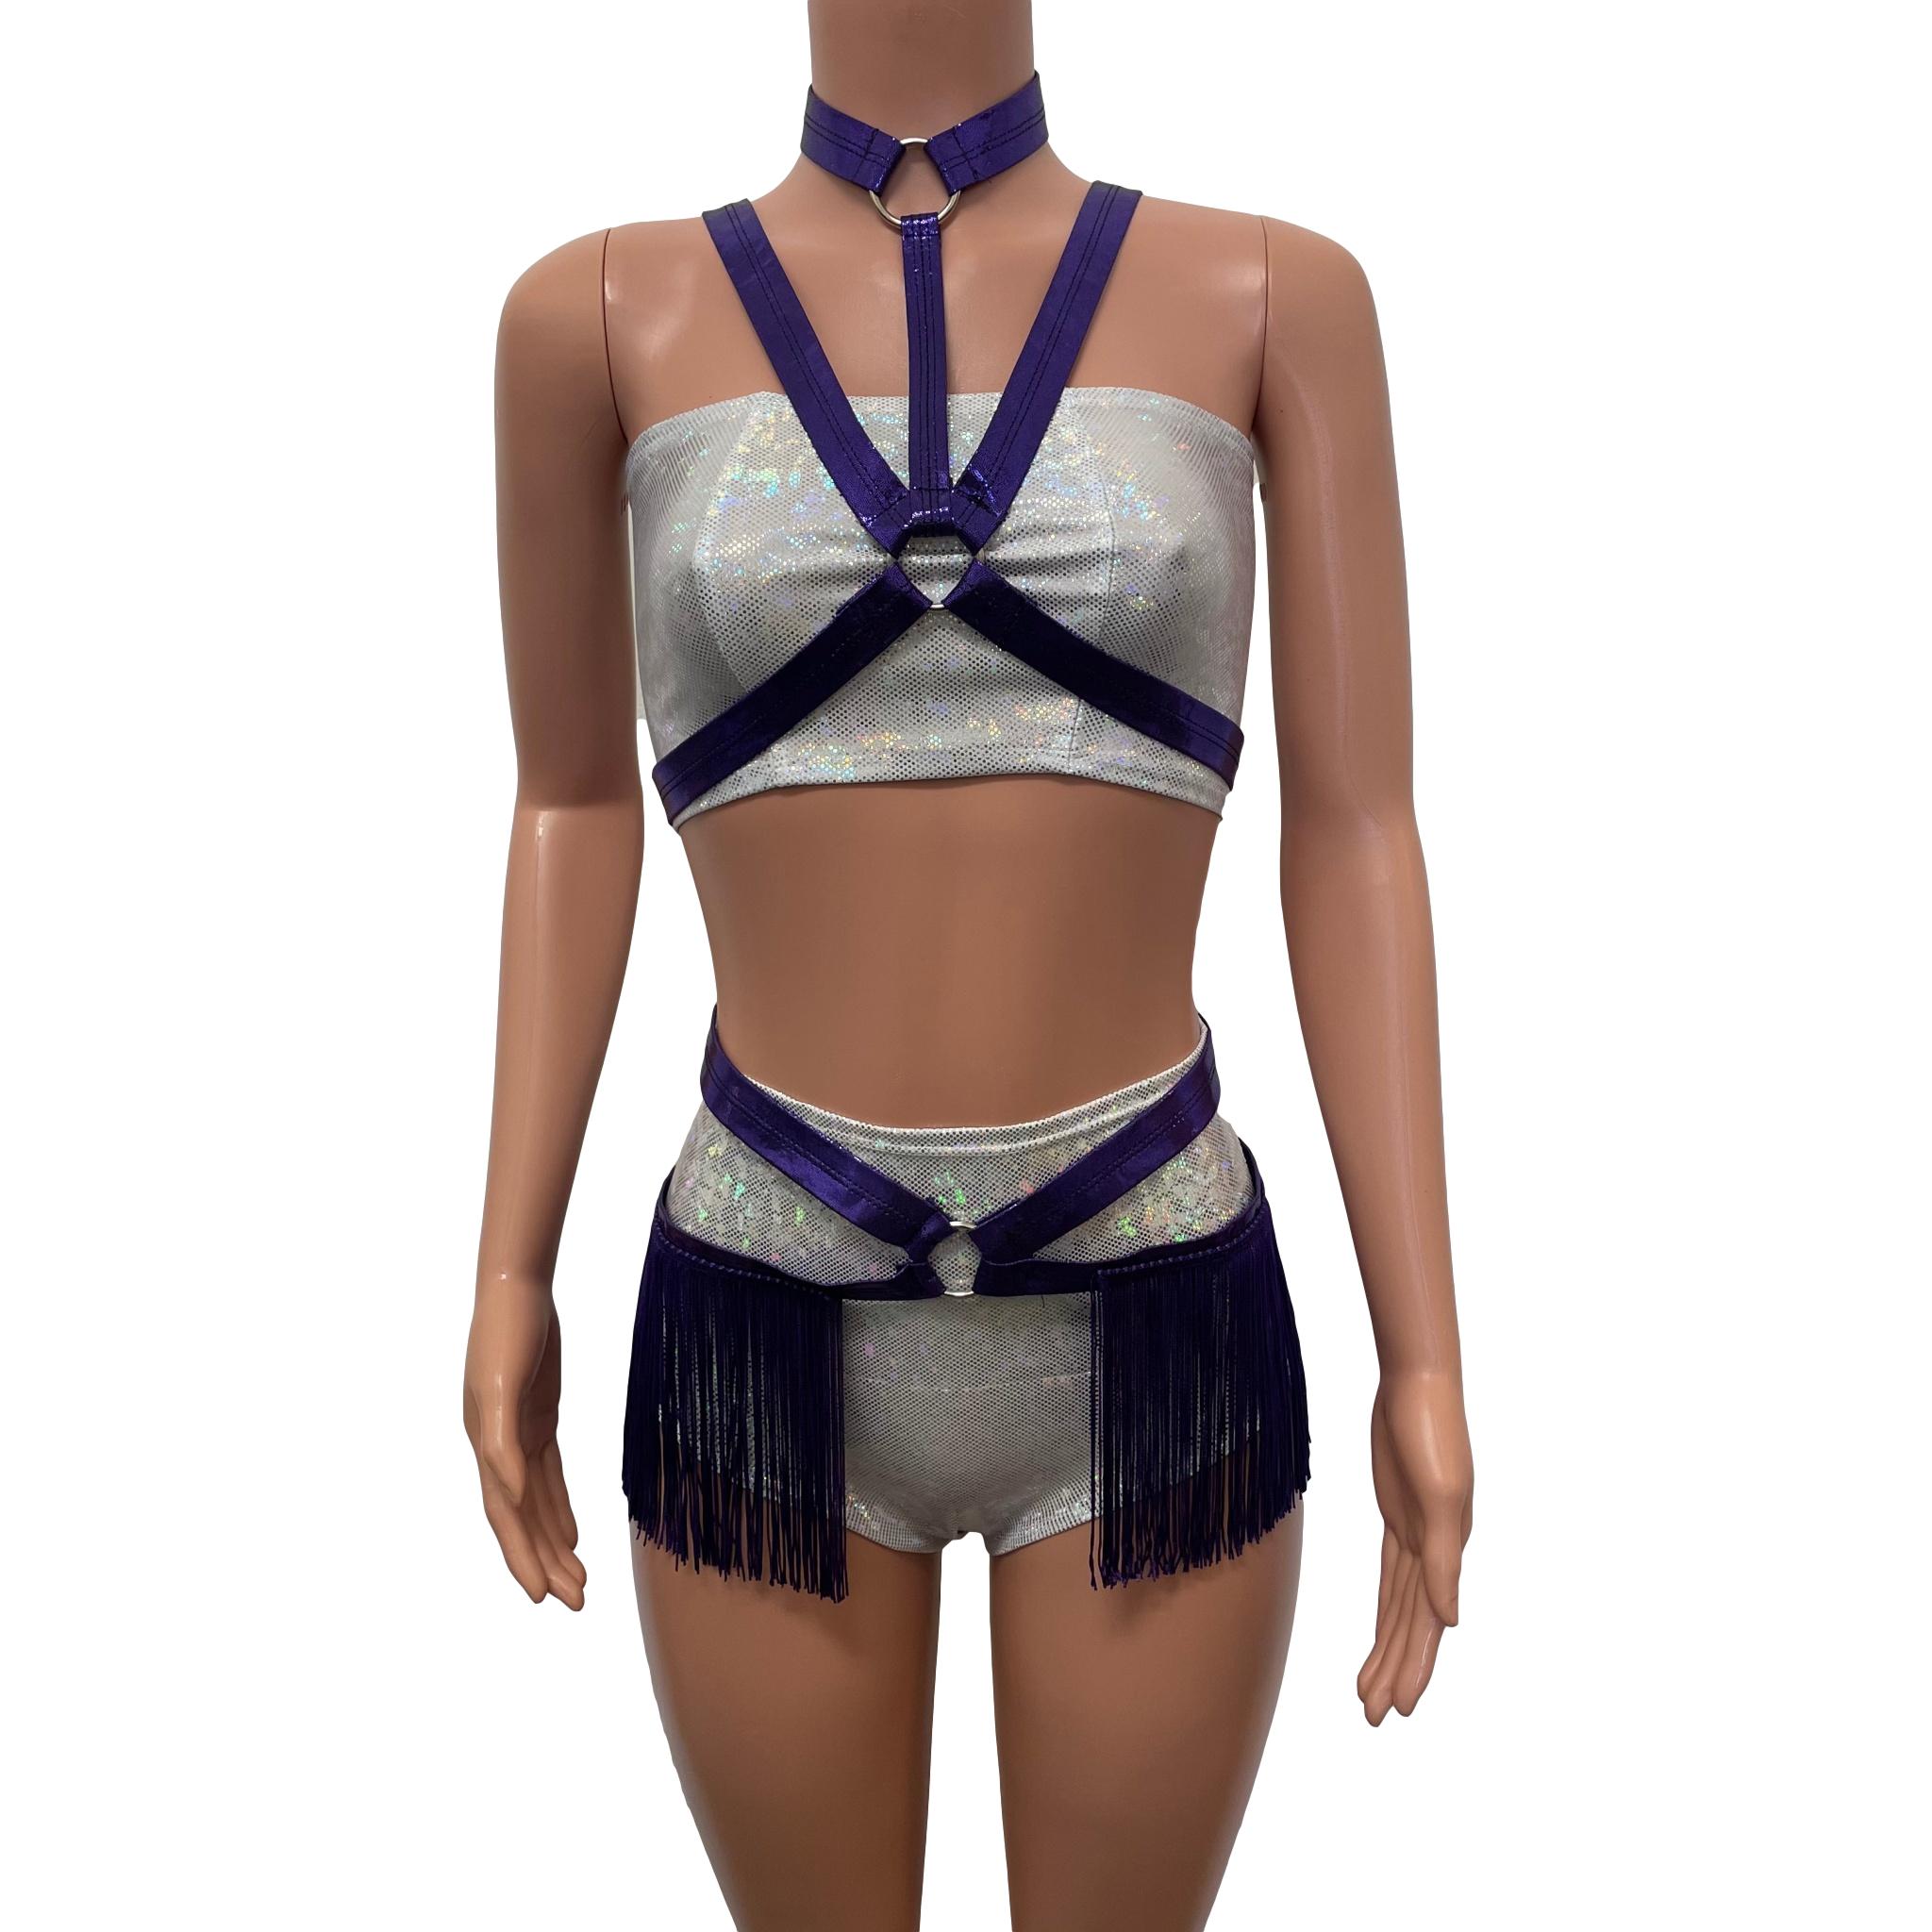 Fringe Harness Set in Purple Mystique Metallic Cage Bra Rave Body Harness  Outfit W/ Fringe Skirt and Choker -  Canada